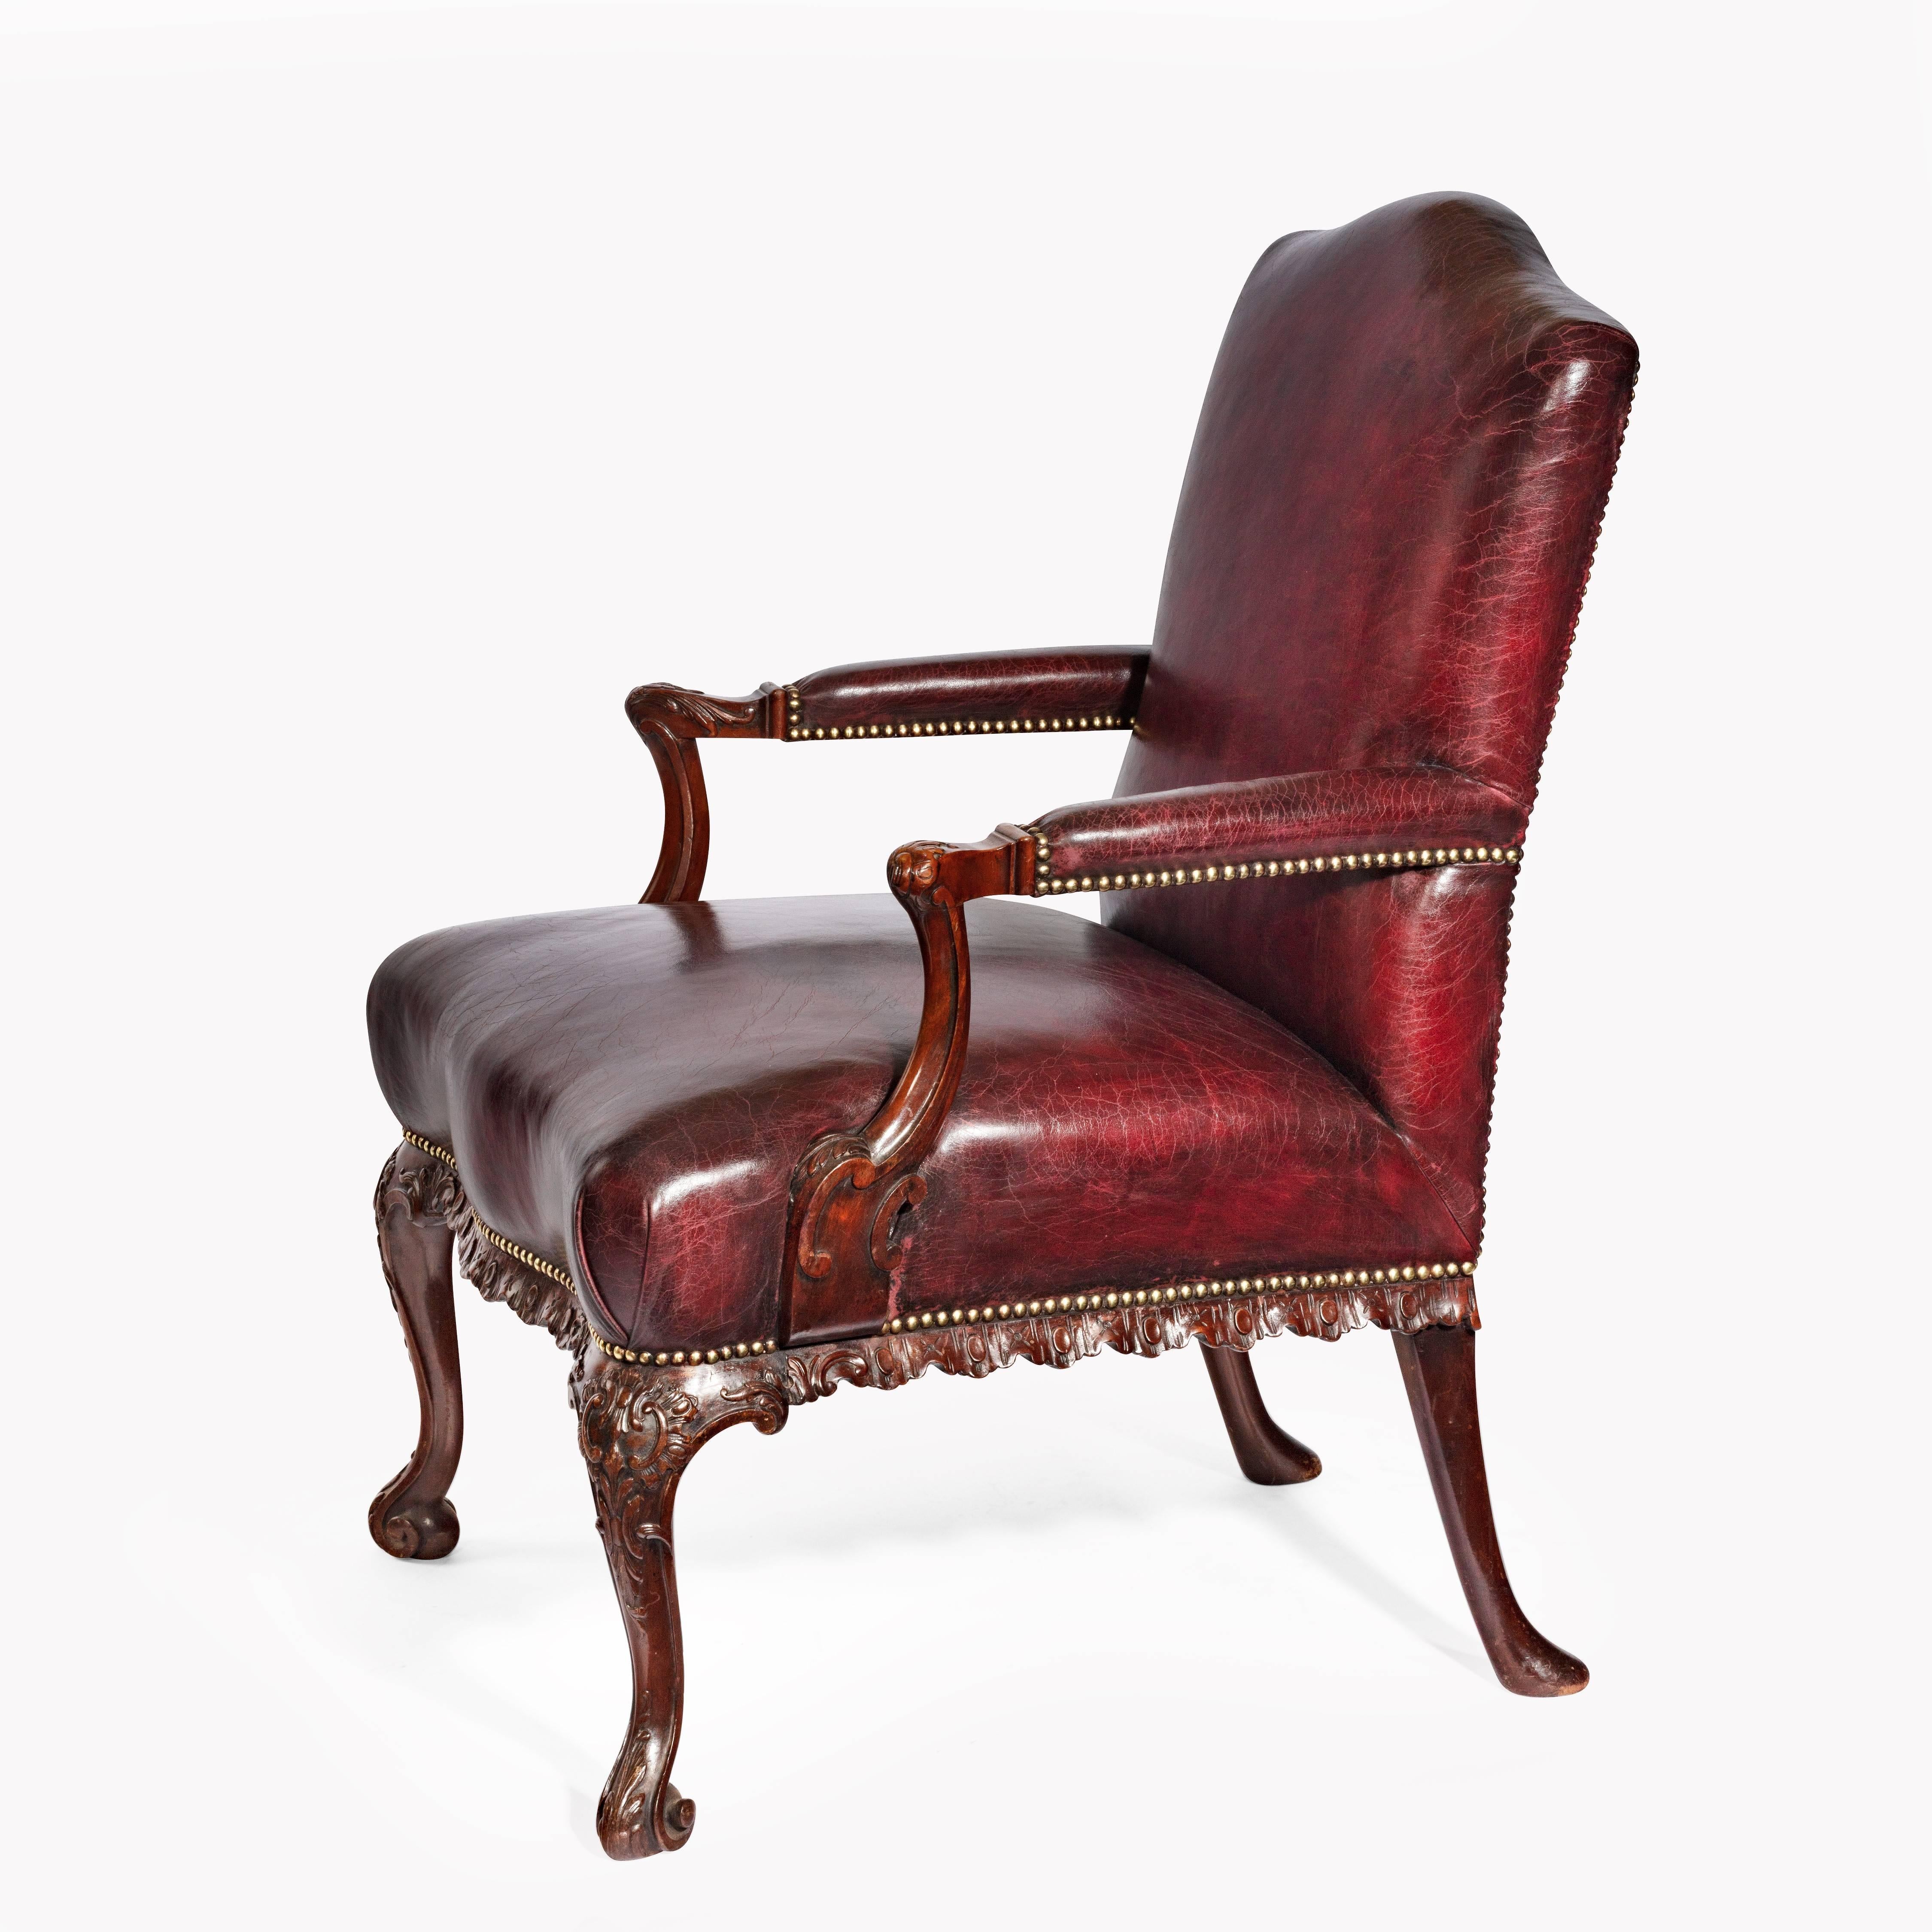 A pair late Victorian mahogany open armchairs in the Chippendale taste, each of generous proportions with carved arms, seat rail and front cabriole legs decorated with C-scrolls and acanthus leaves with plain, out-swept back legs, English, circa